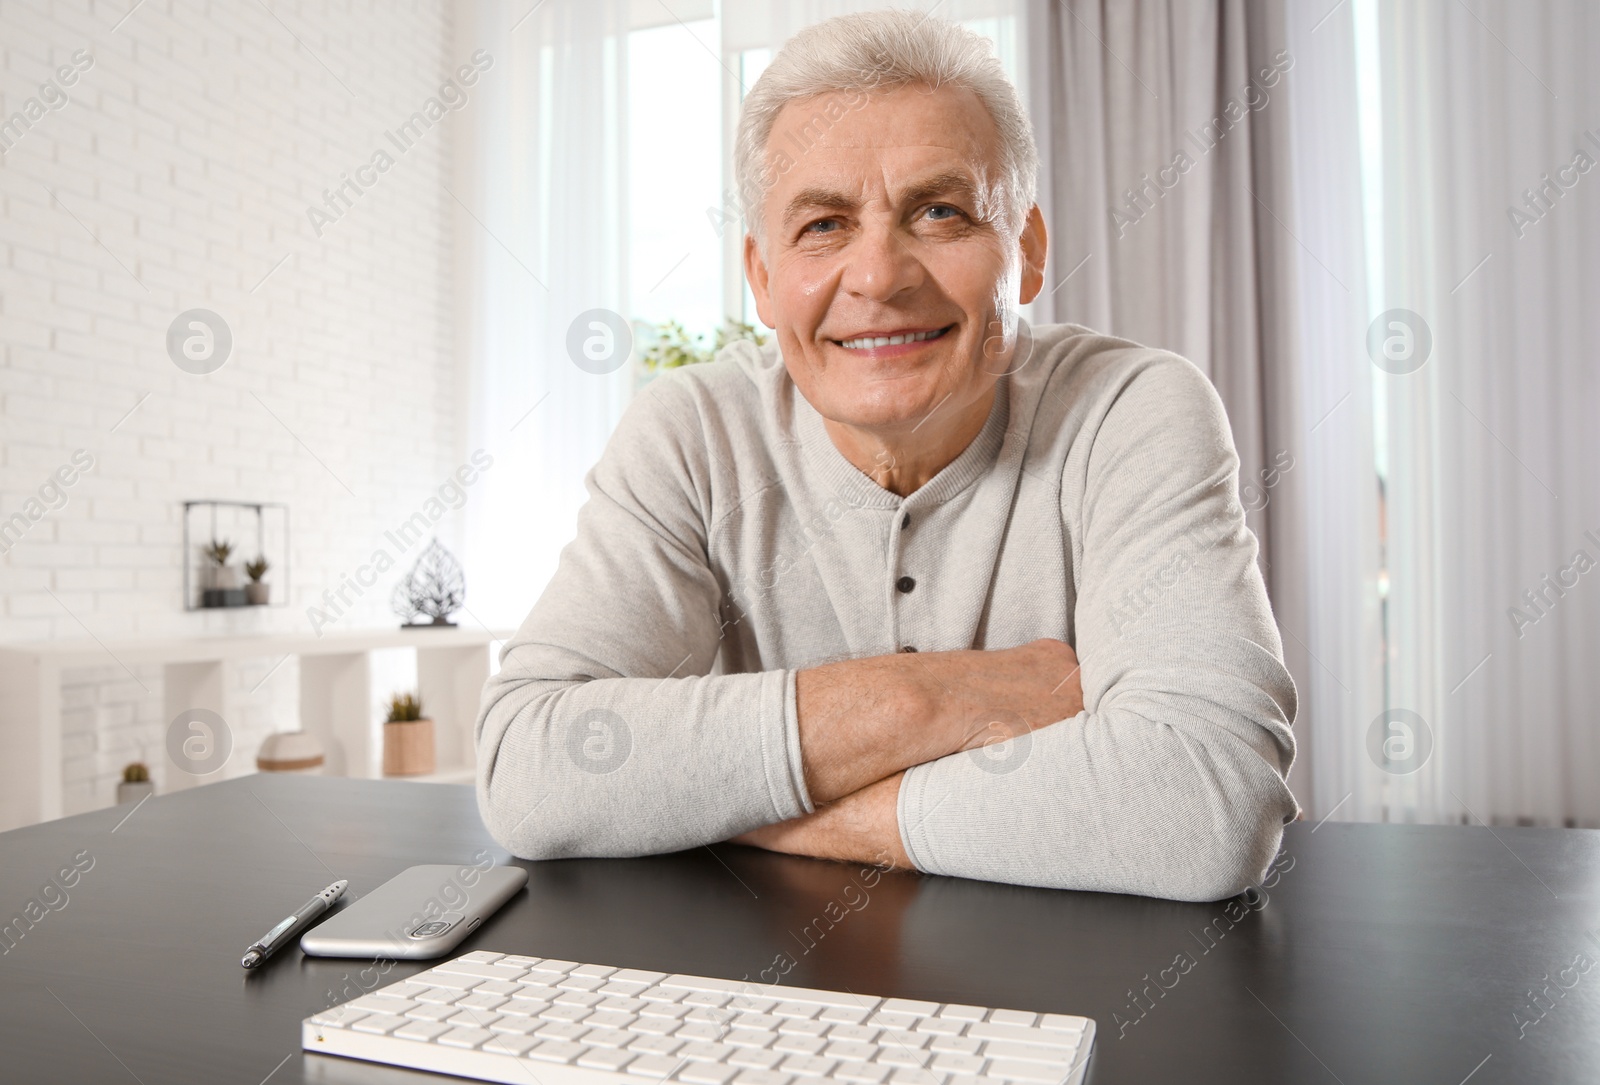 Photo of Mature man using video chat at home, view from web camera